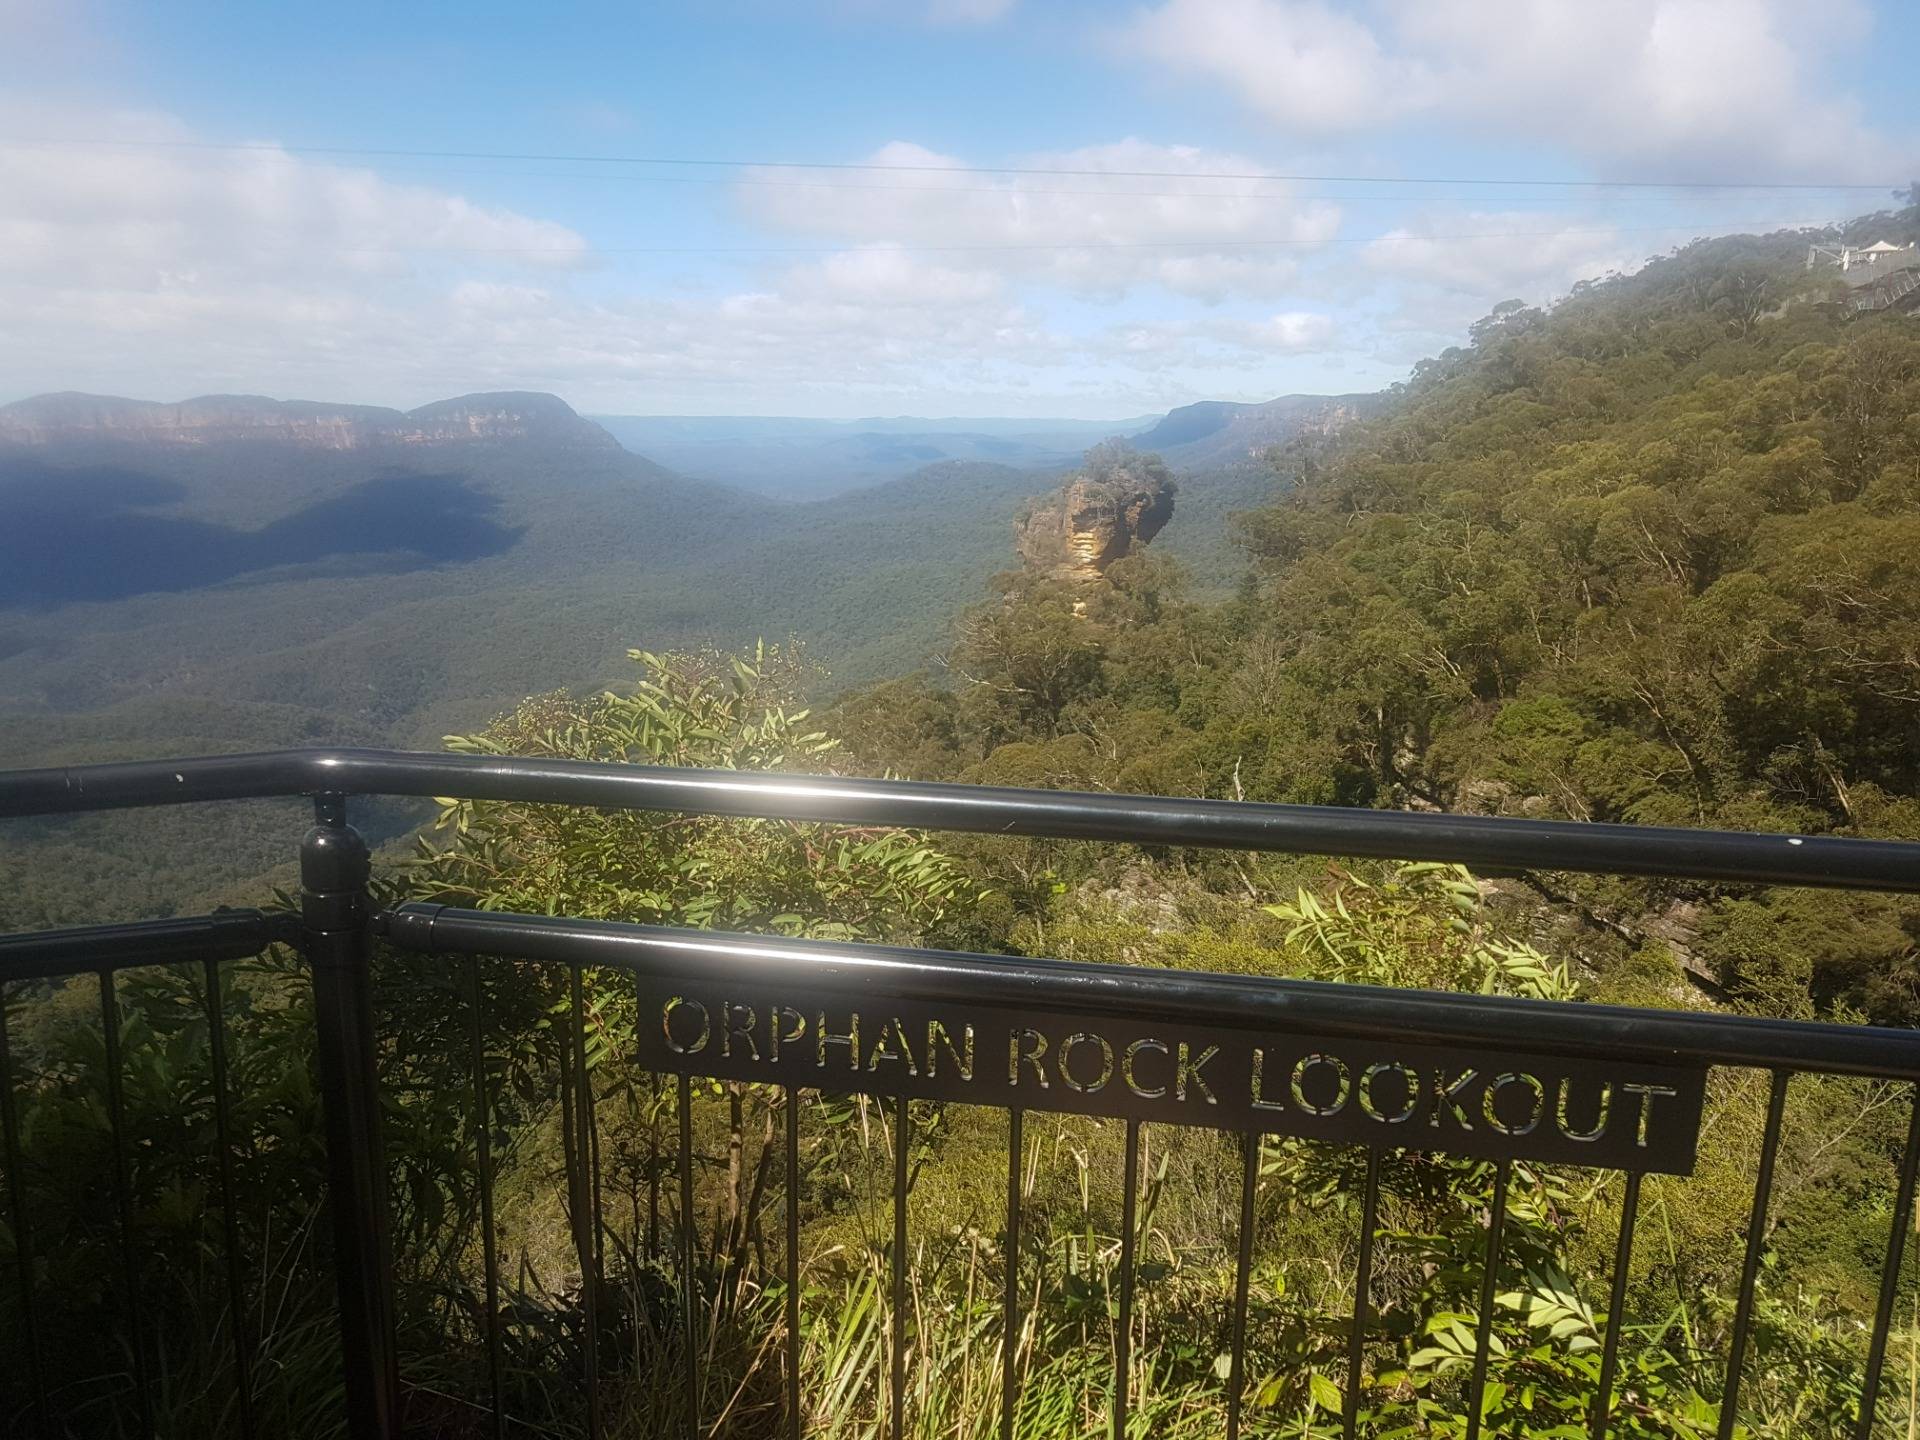 Luckily the weather got better. This shot was taken from a concrete loop path at Reid’s Plateau and the views were clear and epic! In this one short walk we got to so many different lookouts with wonderful views. This is the lesser-known, lovely Orphan Rock.